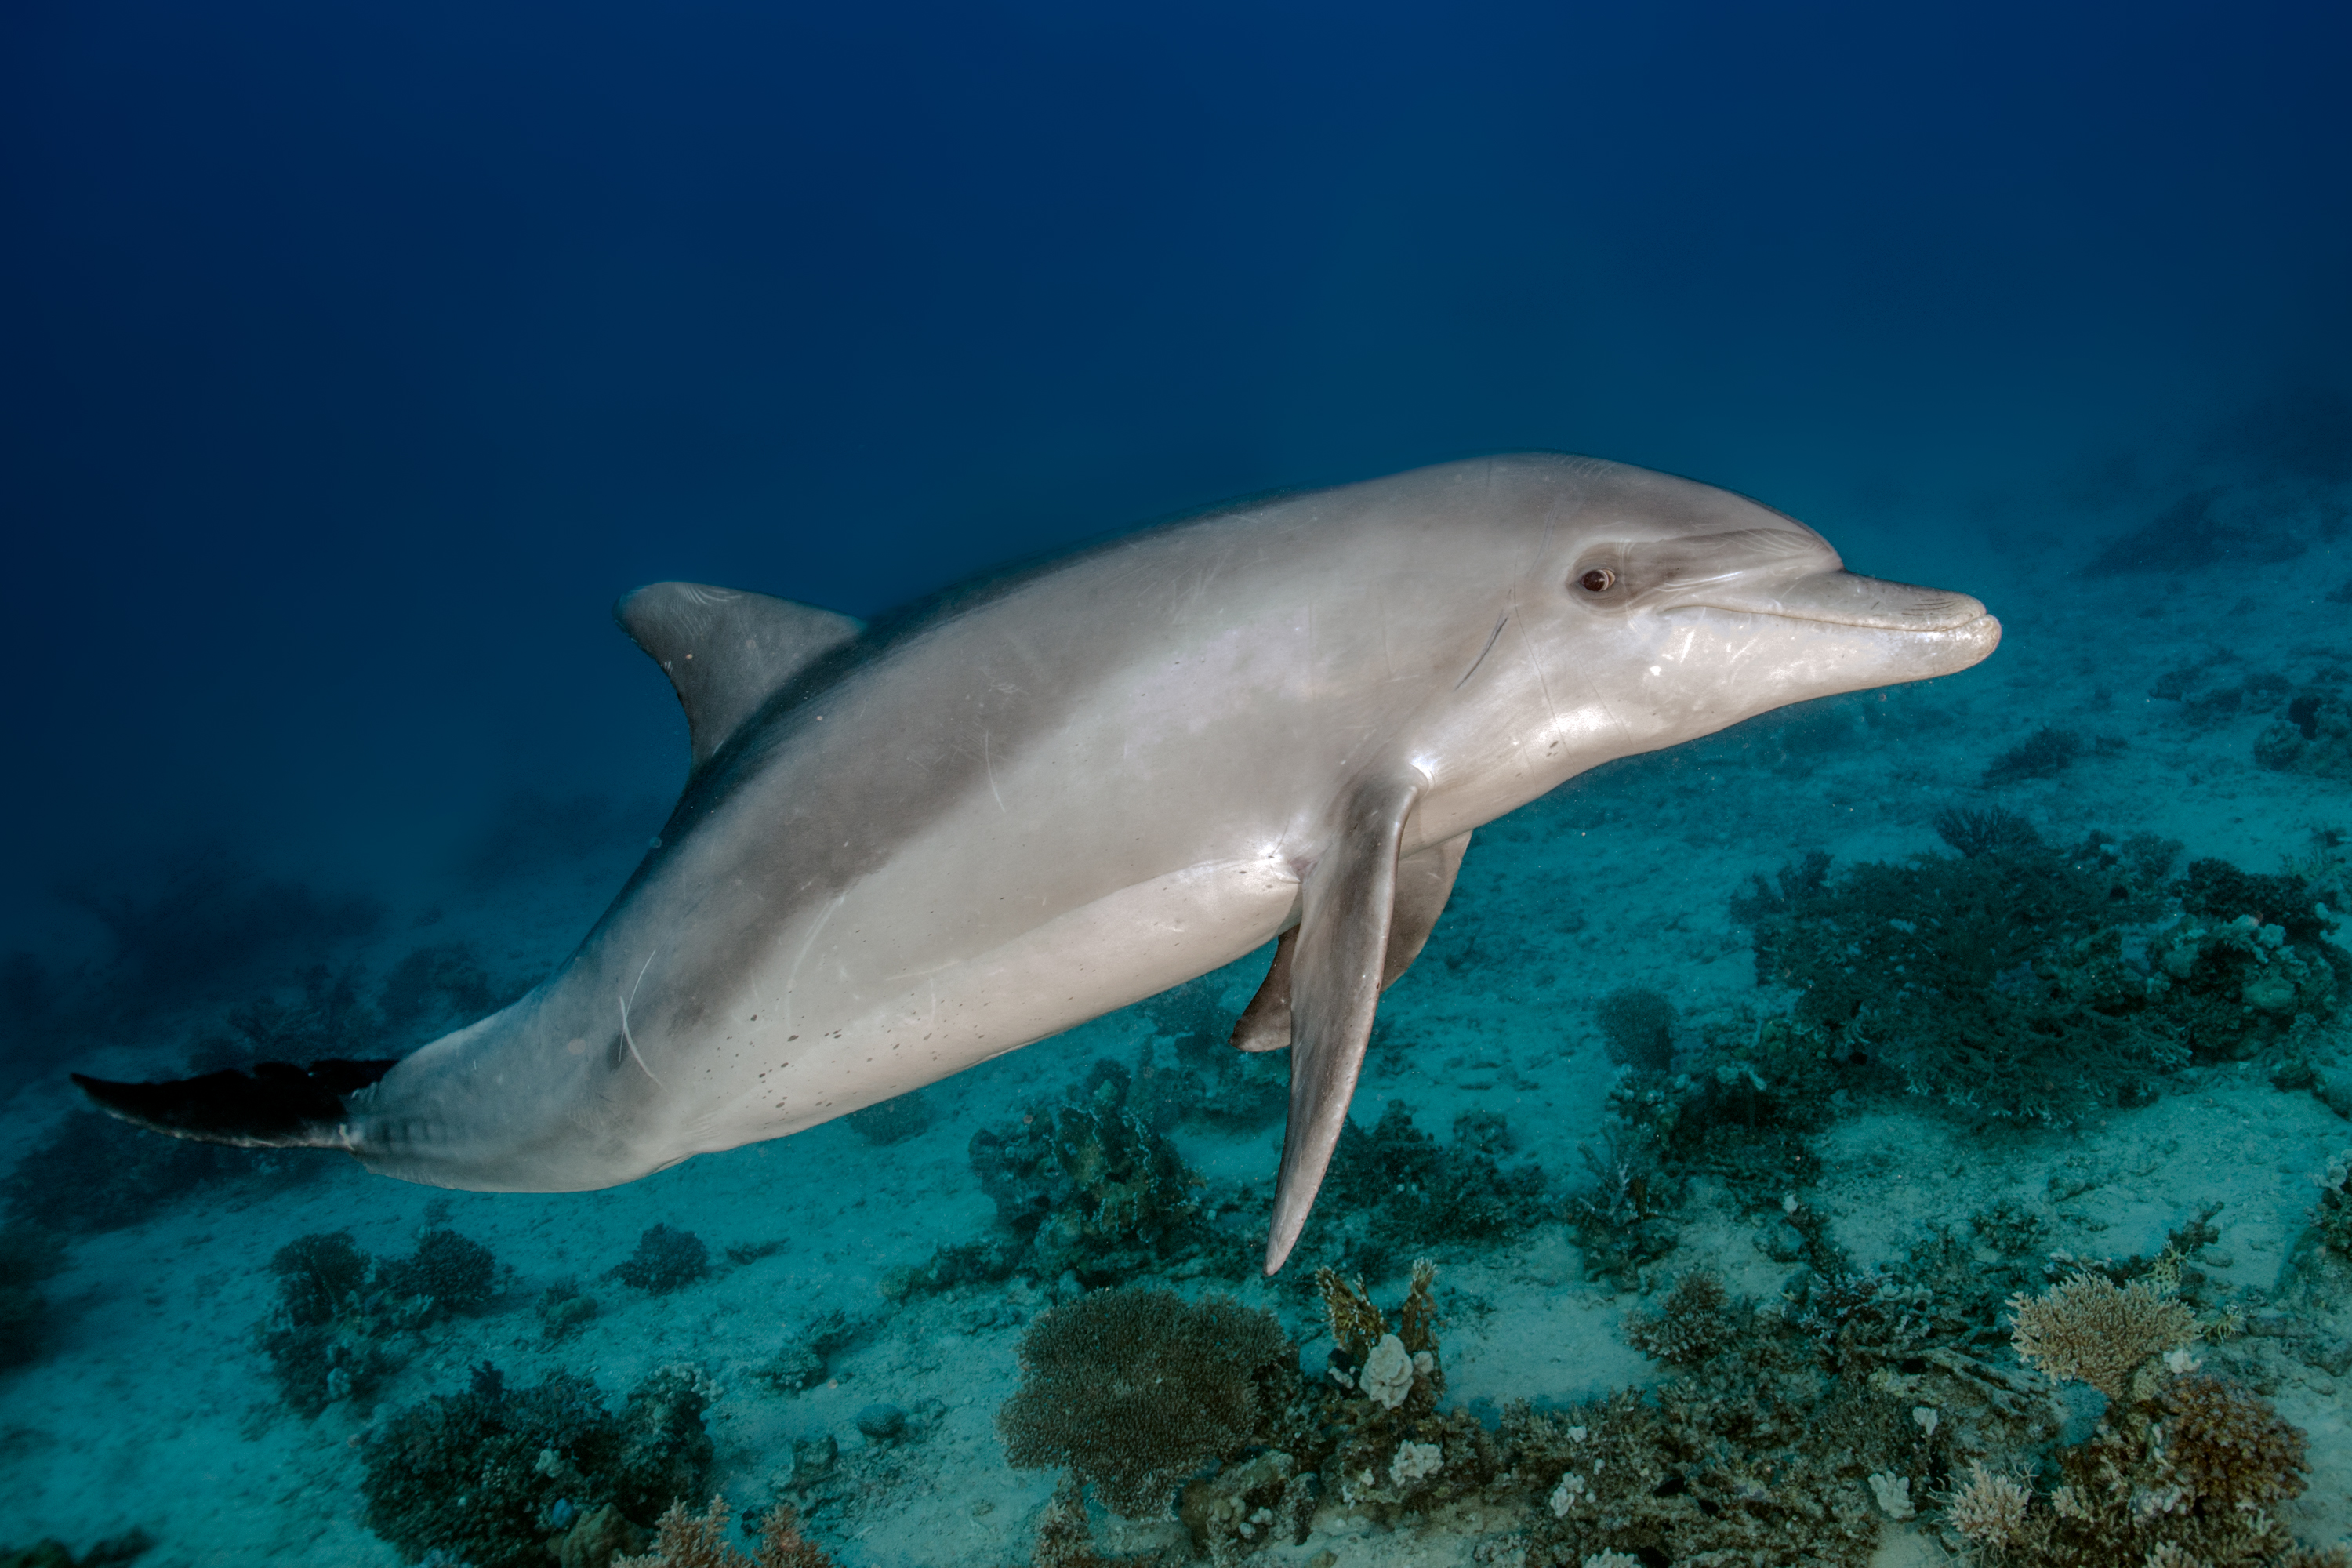 Juvenile dolphin, Red Sea. Photo by Kate Jonker